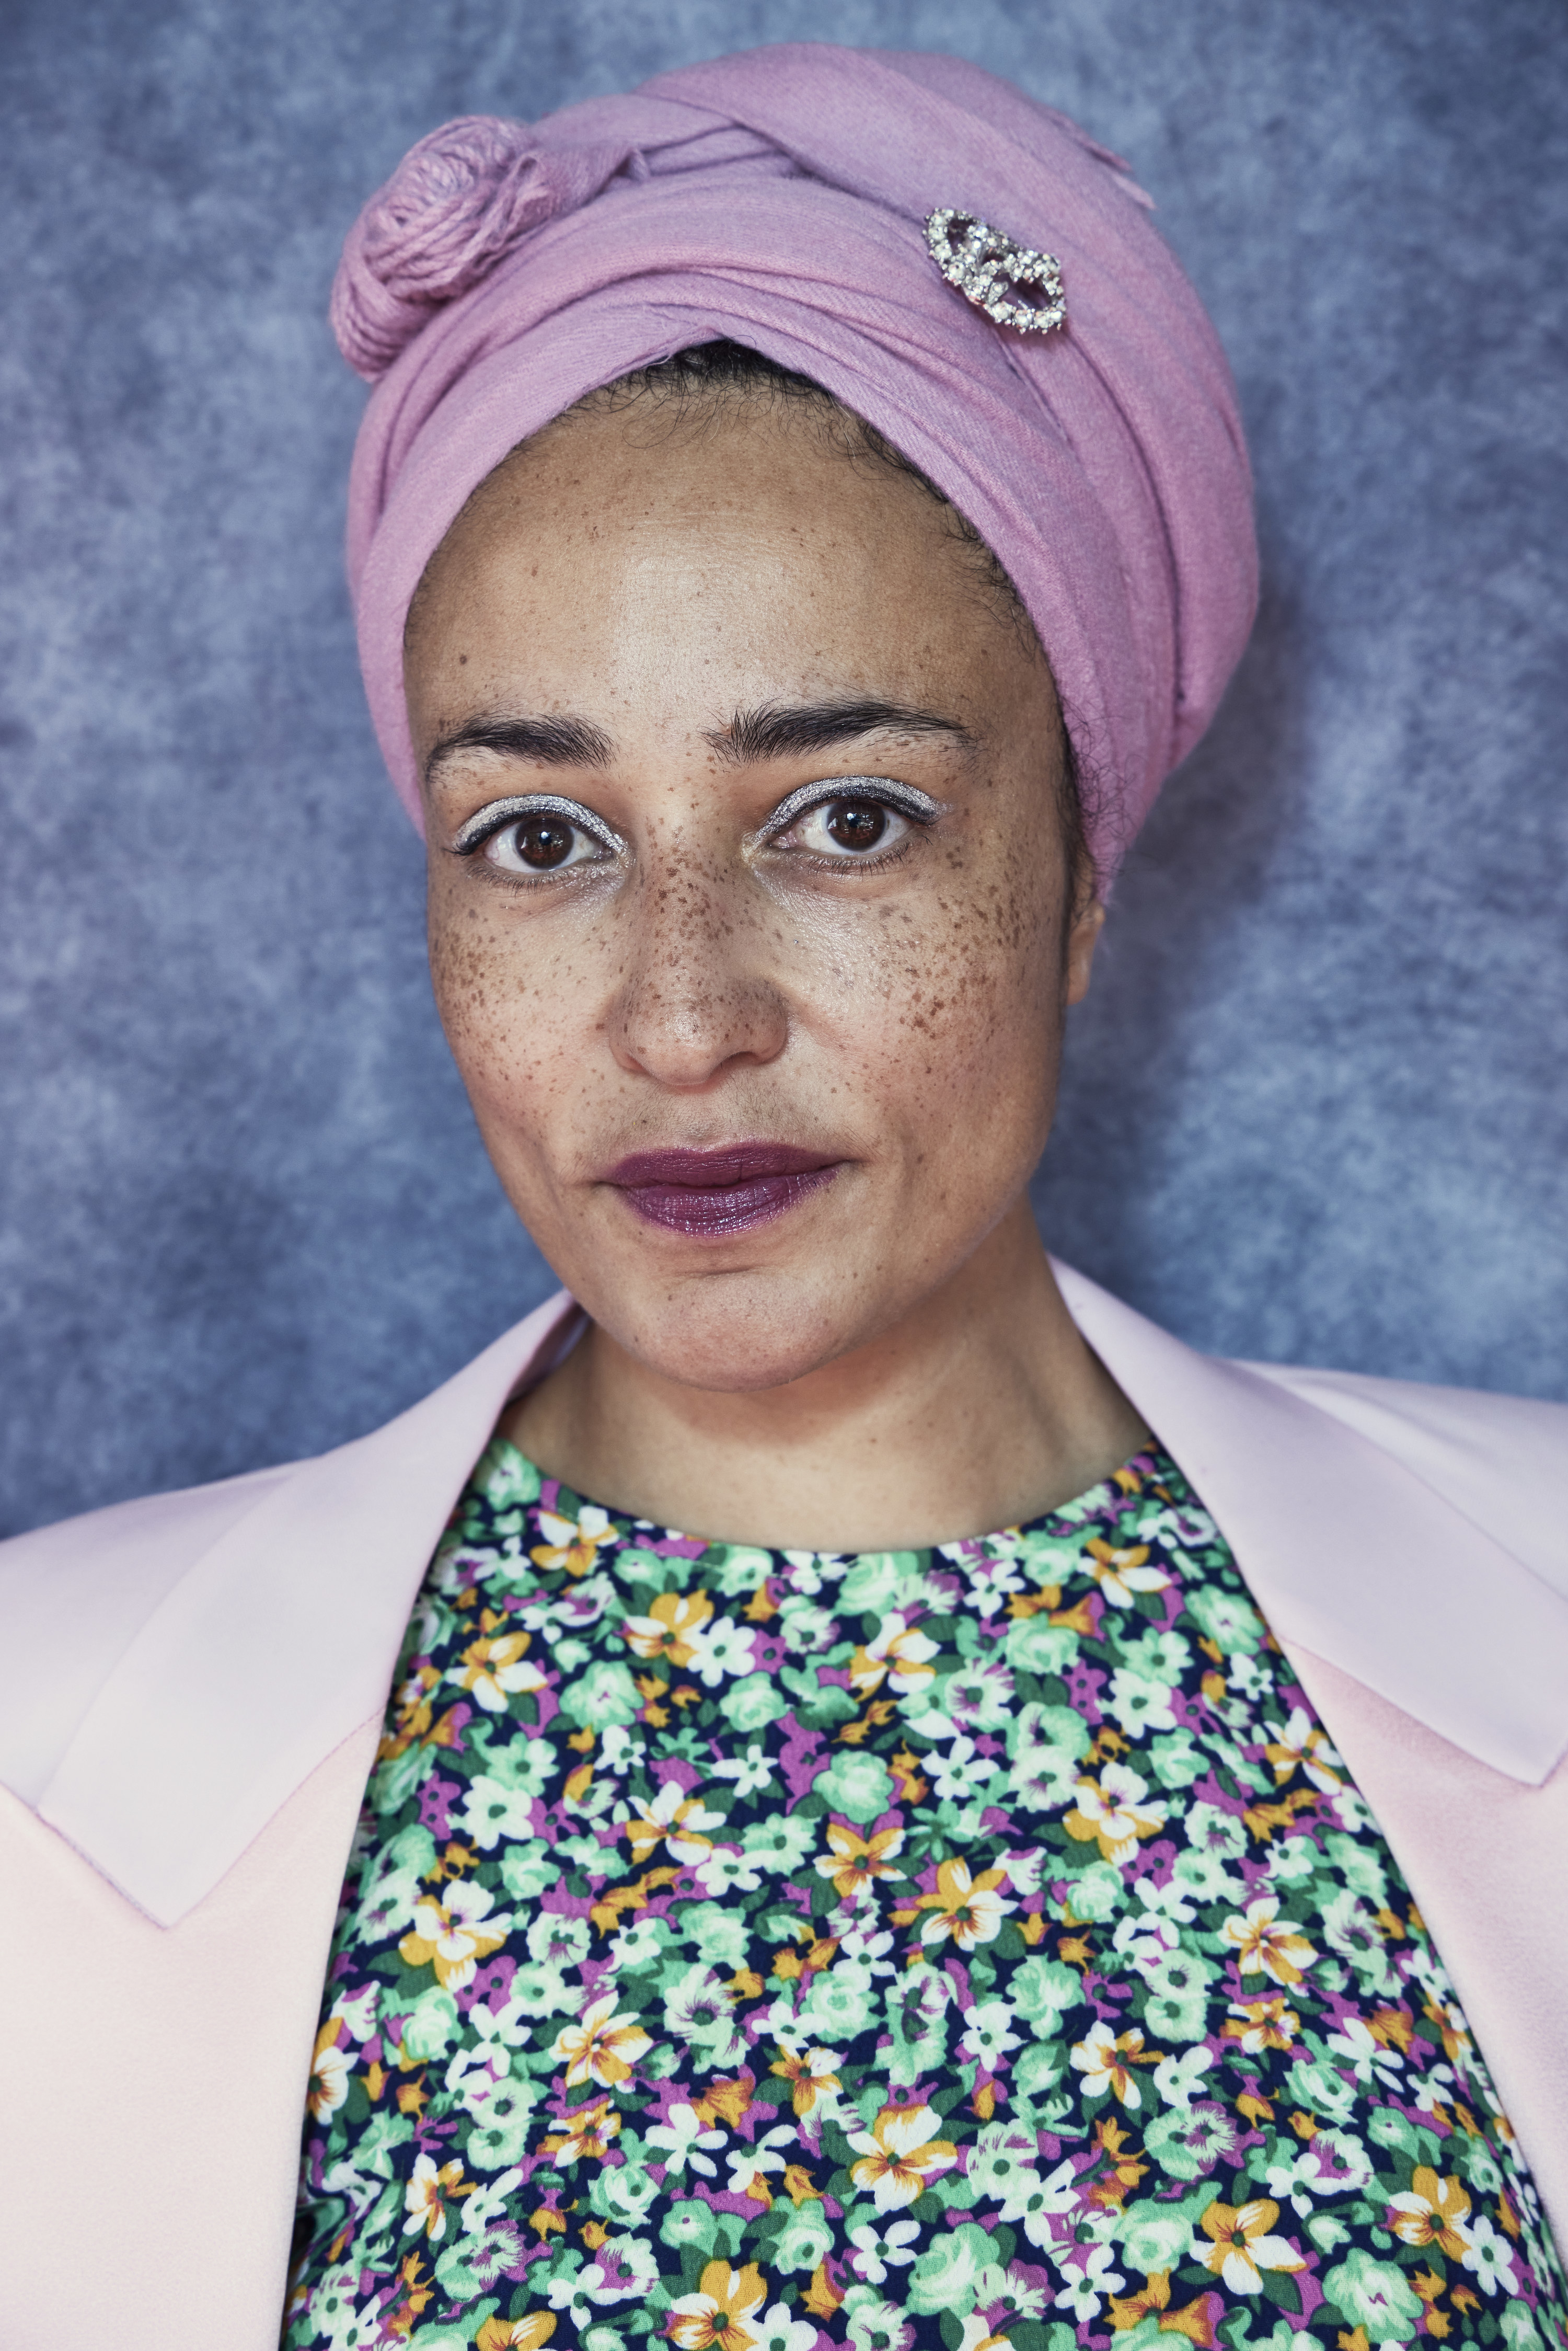 Zadie Smith attends the 16th Rome Film Festival on October 17, 2021